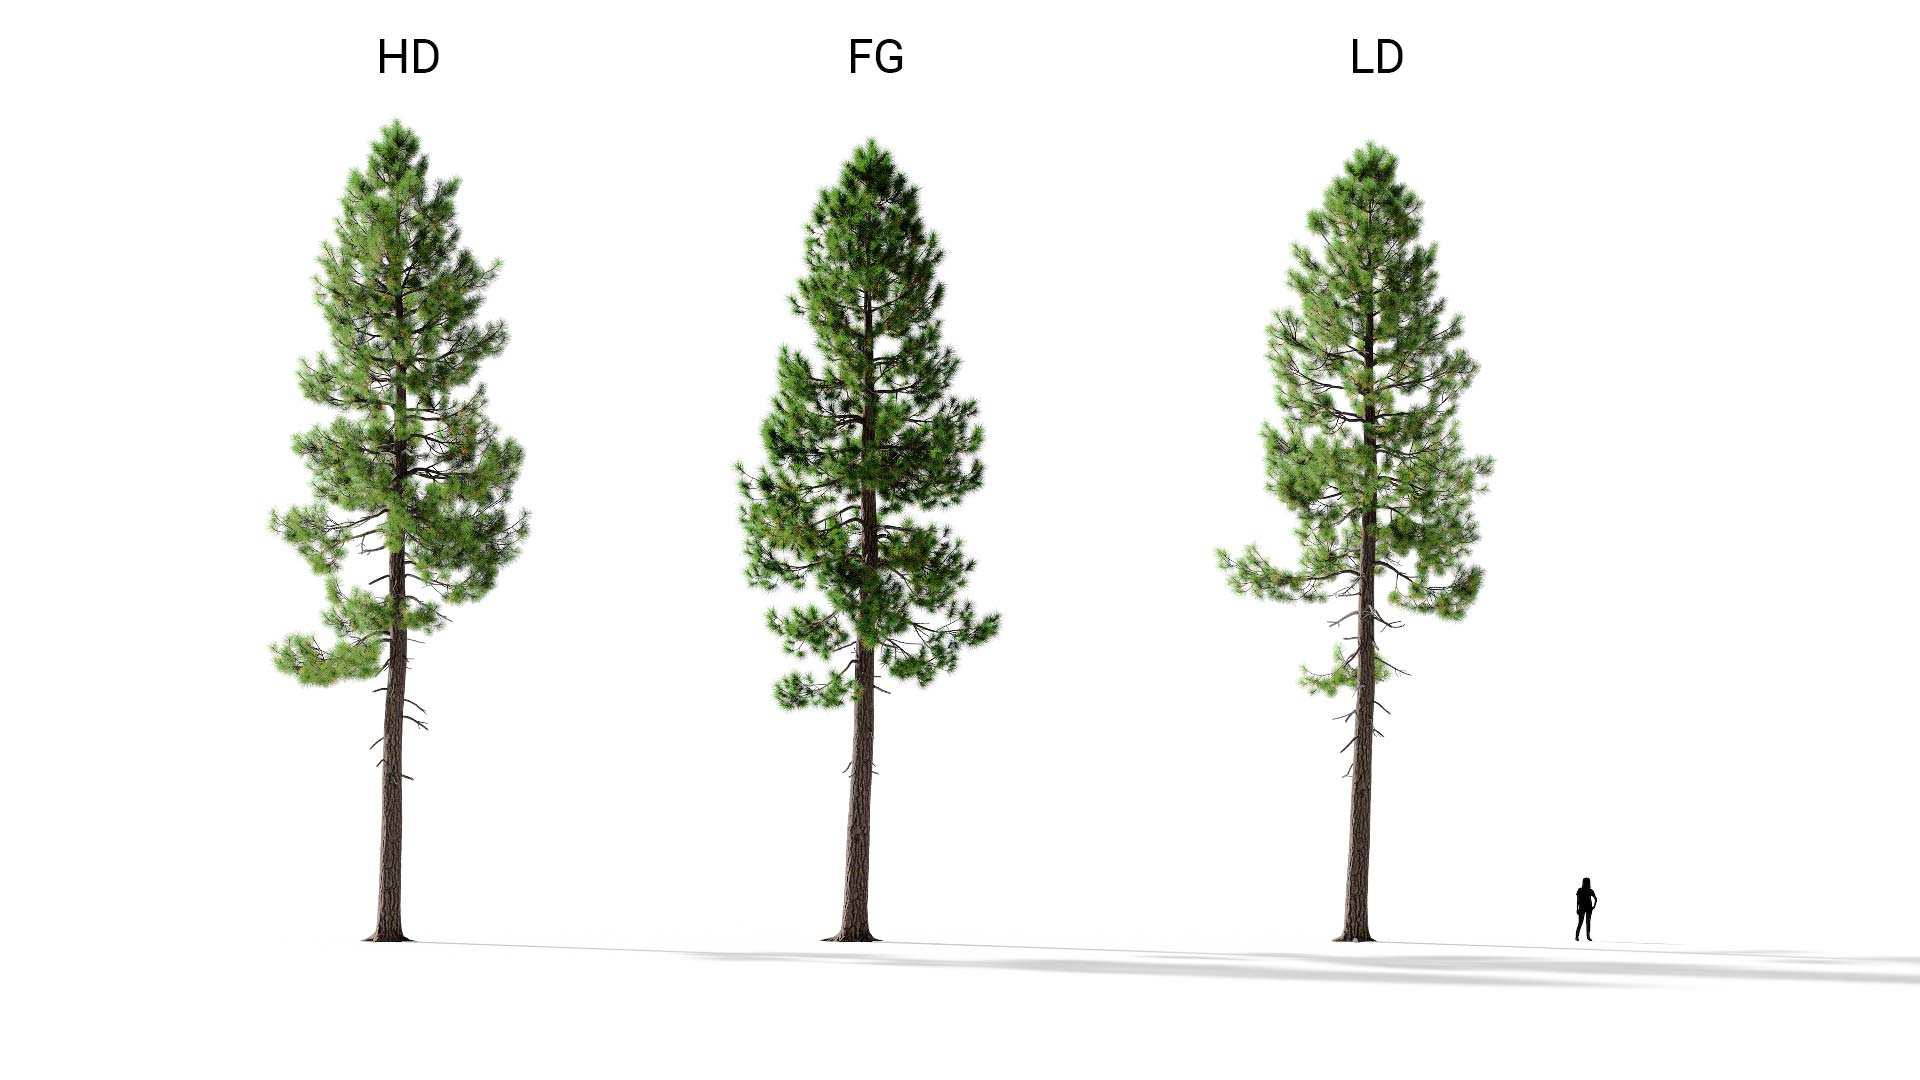 3D model of the Ponderosa pine forest Pinus ponderosa forest included versions